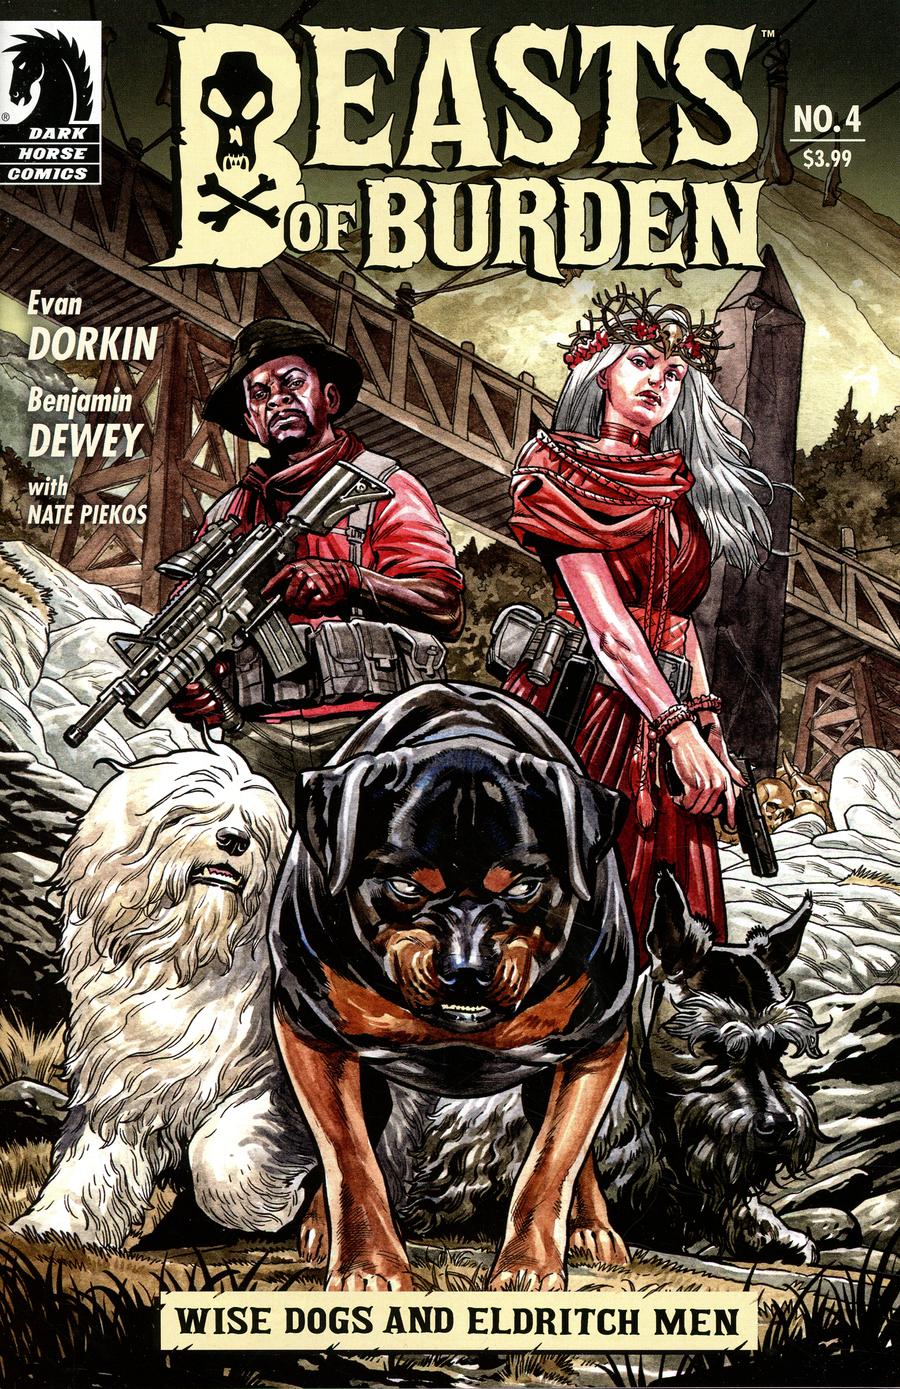 BEASTS OF BURDEN WISE DOGS AND ELDRITCH MEN #4 (OF 4) CVR A